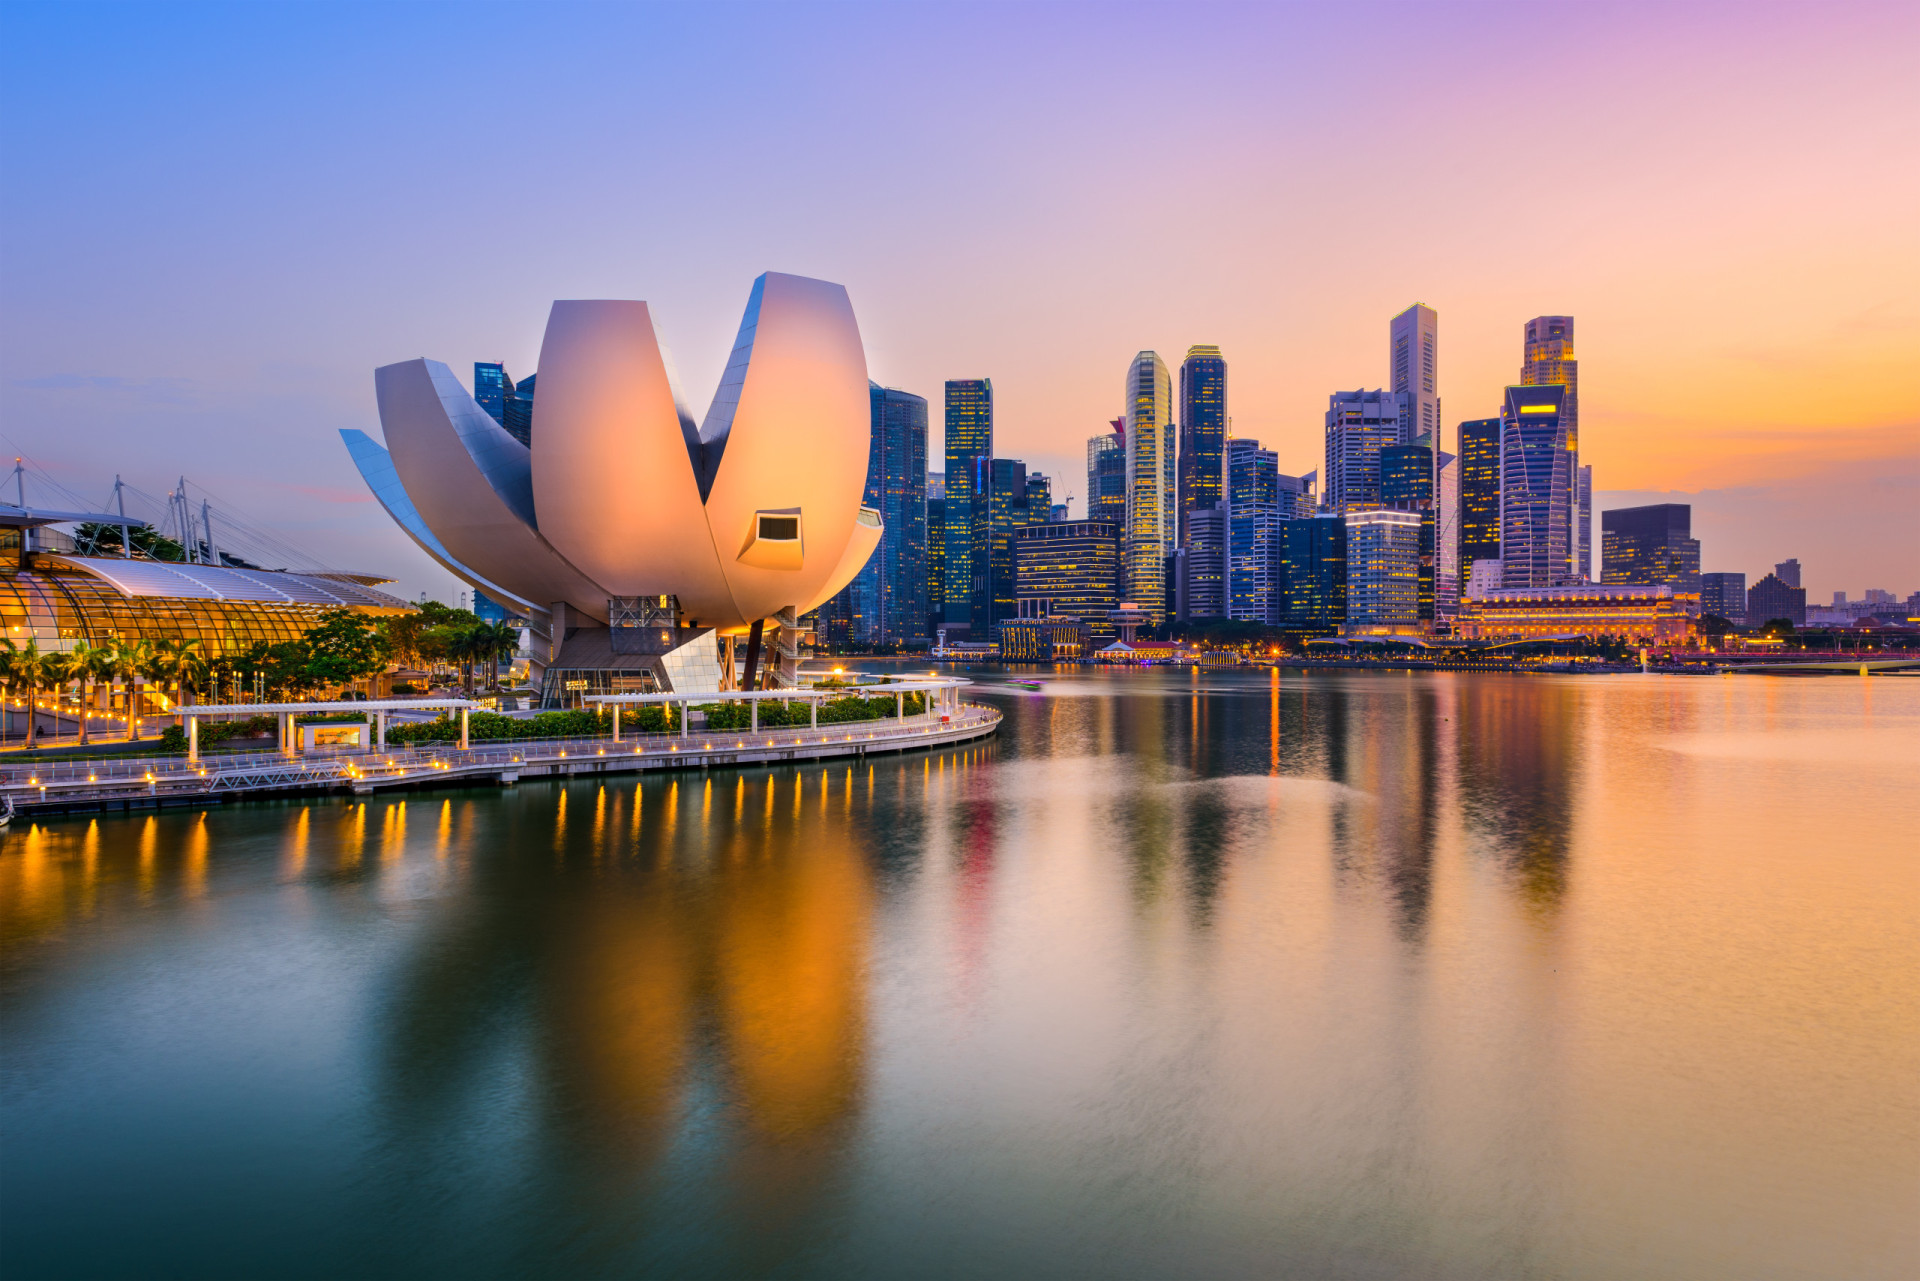 <p>Singapore, a city-state, dazzles with prosperity. With a rent index of 97.1, this global powerhouse is renowned for its wealth, high living standards, and as a pivotal transportation hub in Asia.</p><p><a href="https://www.msn.com/en-in/community/channel/vid-7xx8mnucu55yw63we9va2gwr7uihbxwc68fxqp25x6tg4ftibpra?cvid=94631541bc0f4f89bfd59158d696ad7e">Follow us and access great exclusive content every day</a></p>